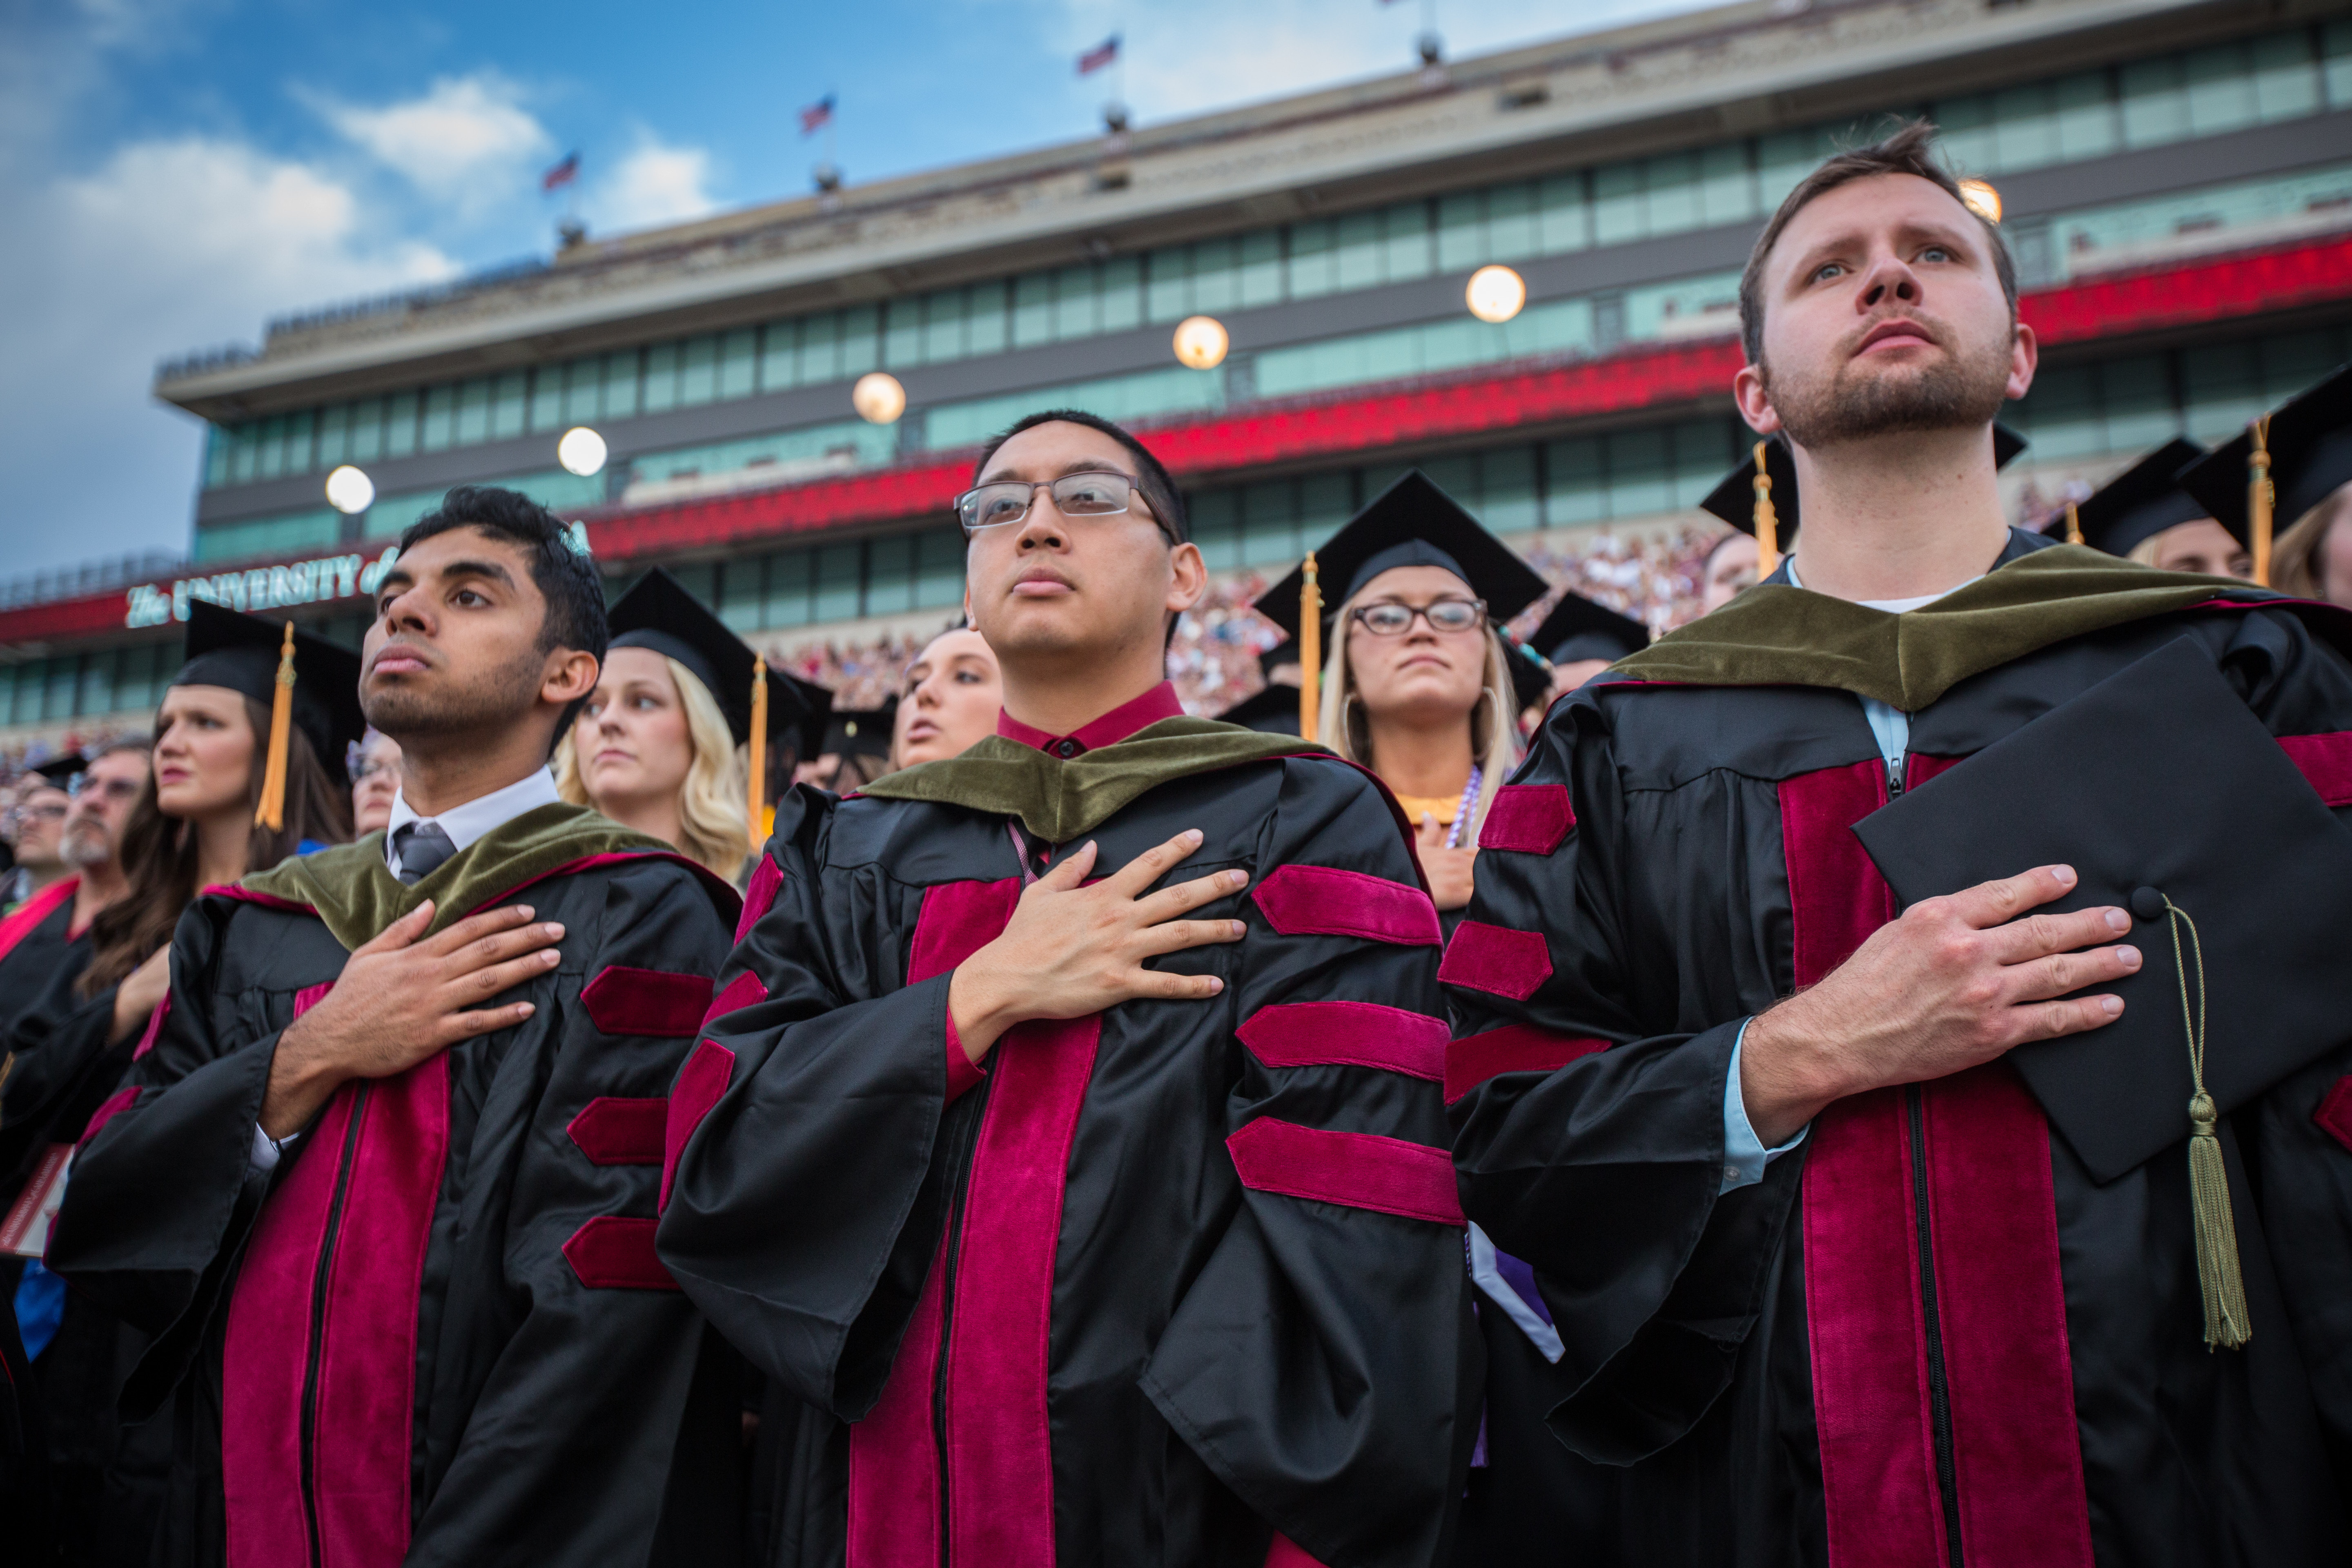 Students in graduate attire attend a celebration at the University of Oklahoma.